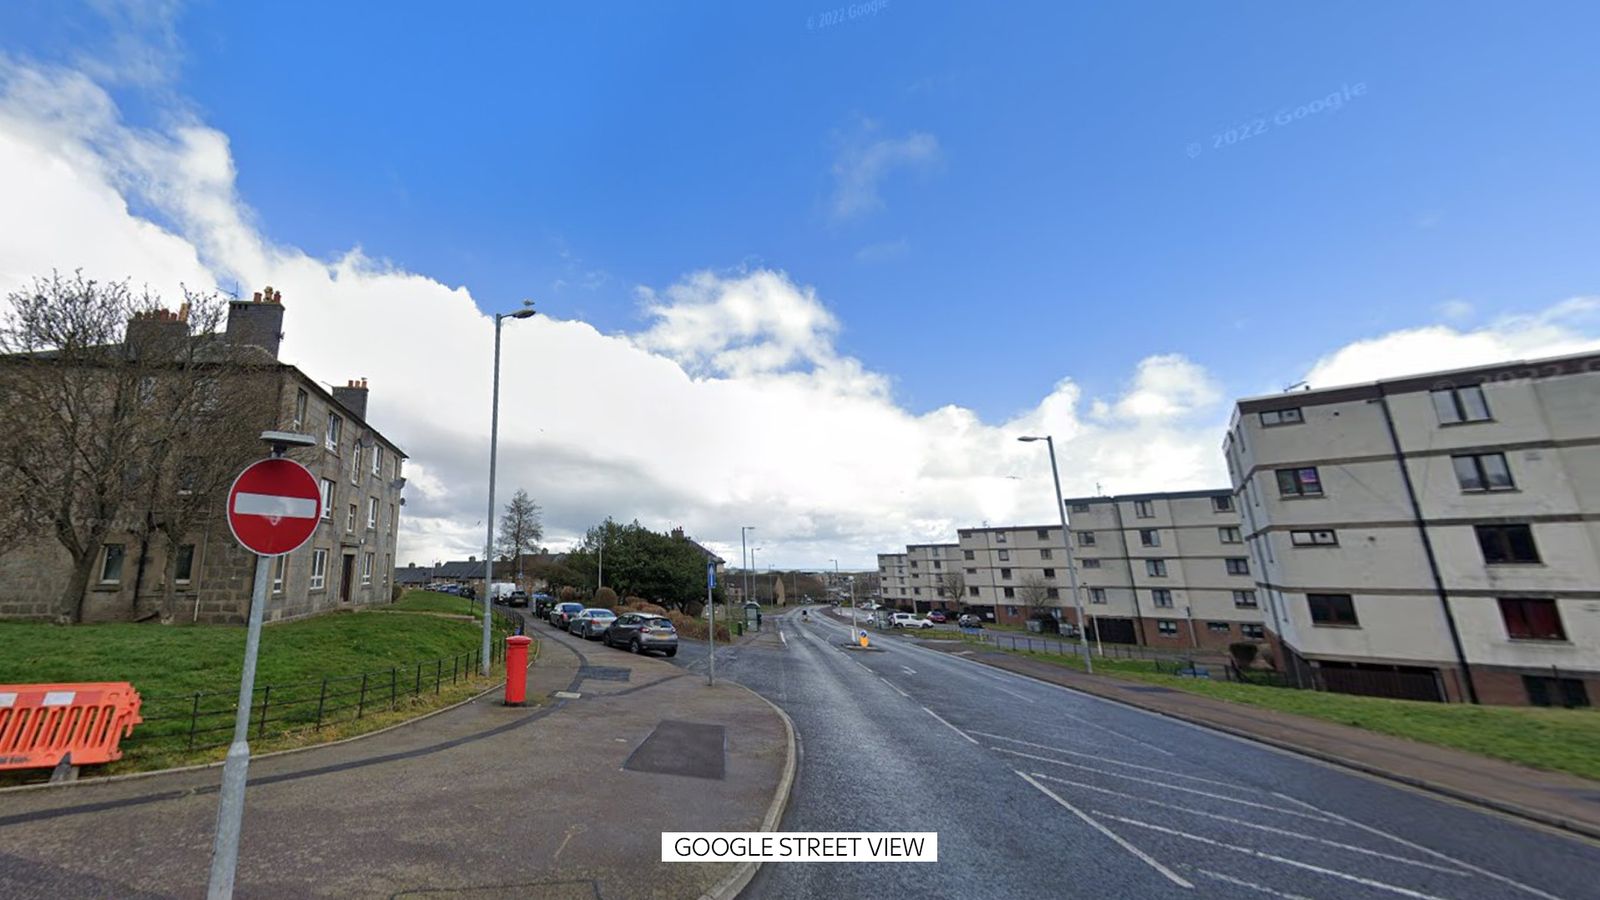 Hundreds of homes with RAAC concrete to be evacuated in Aberdeen